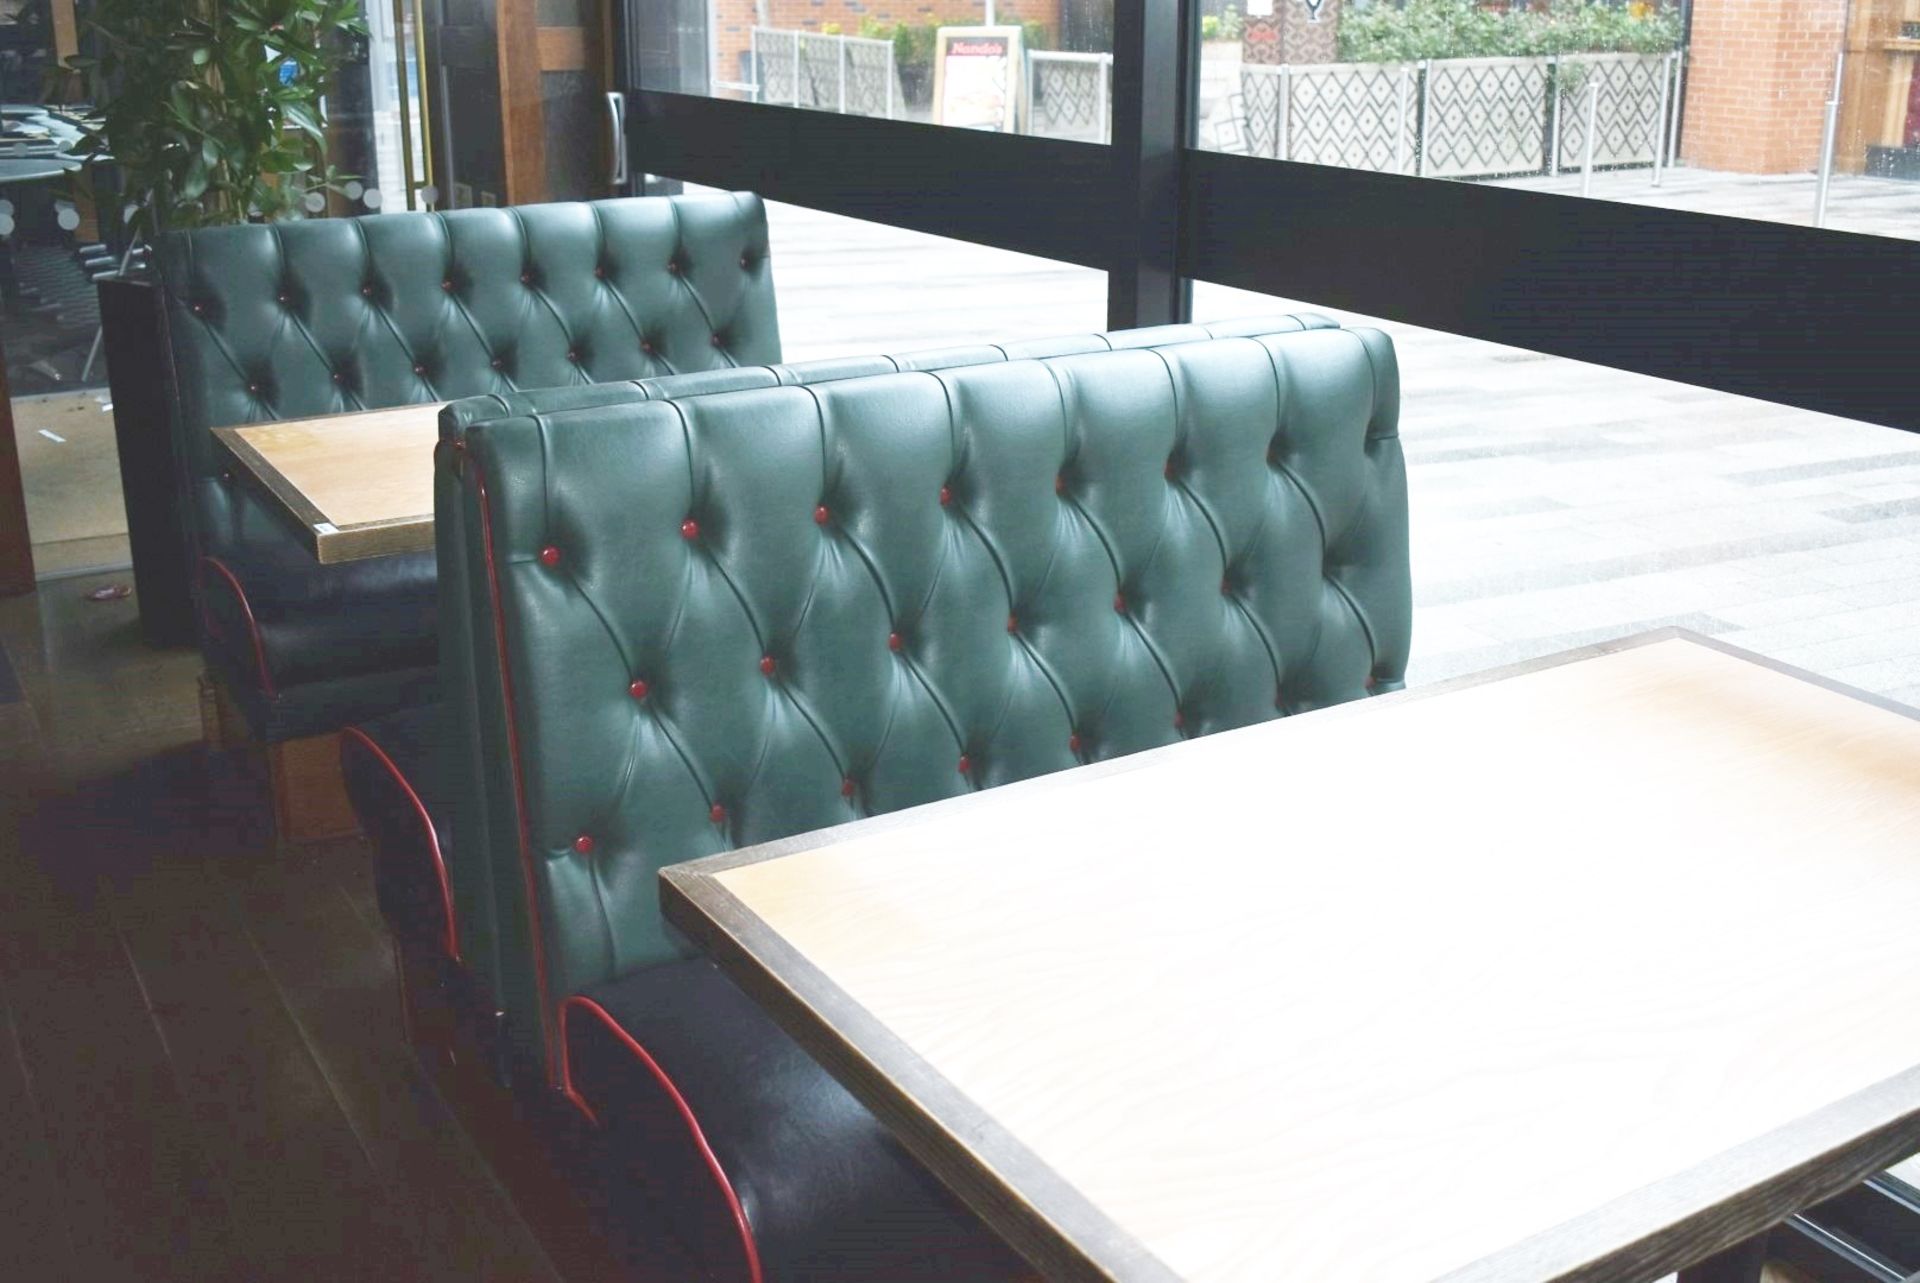 4 x Sections of Restaurant Double Booth Seating - Sits Up to 12 Persons - Green & Black Upholstery - Image 17 of 24